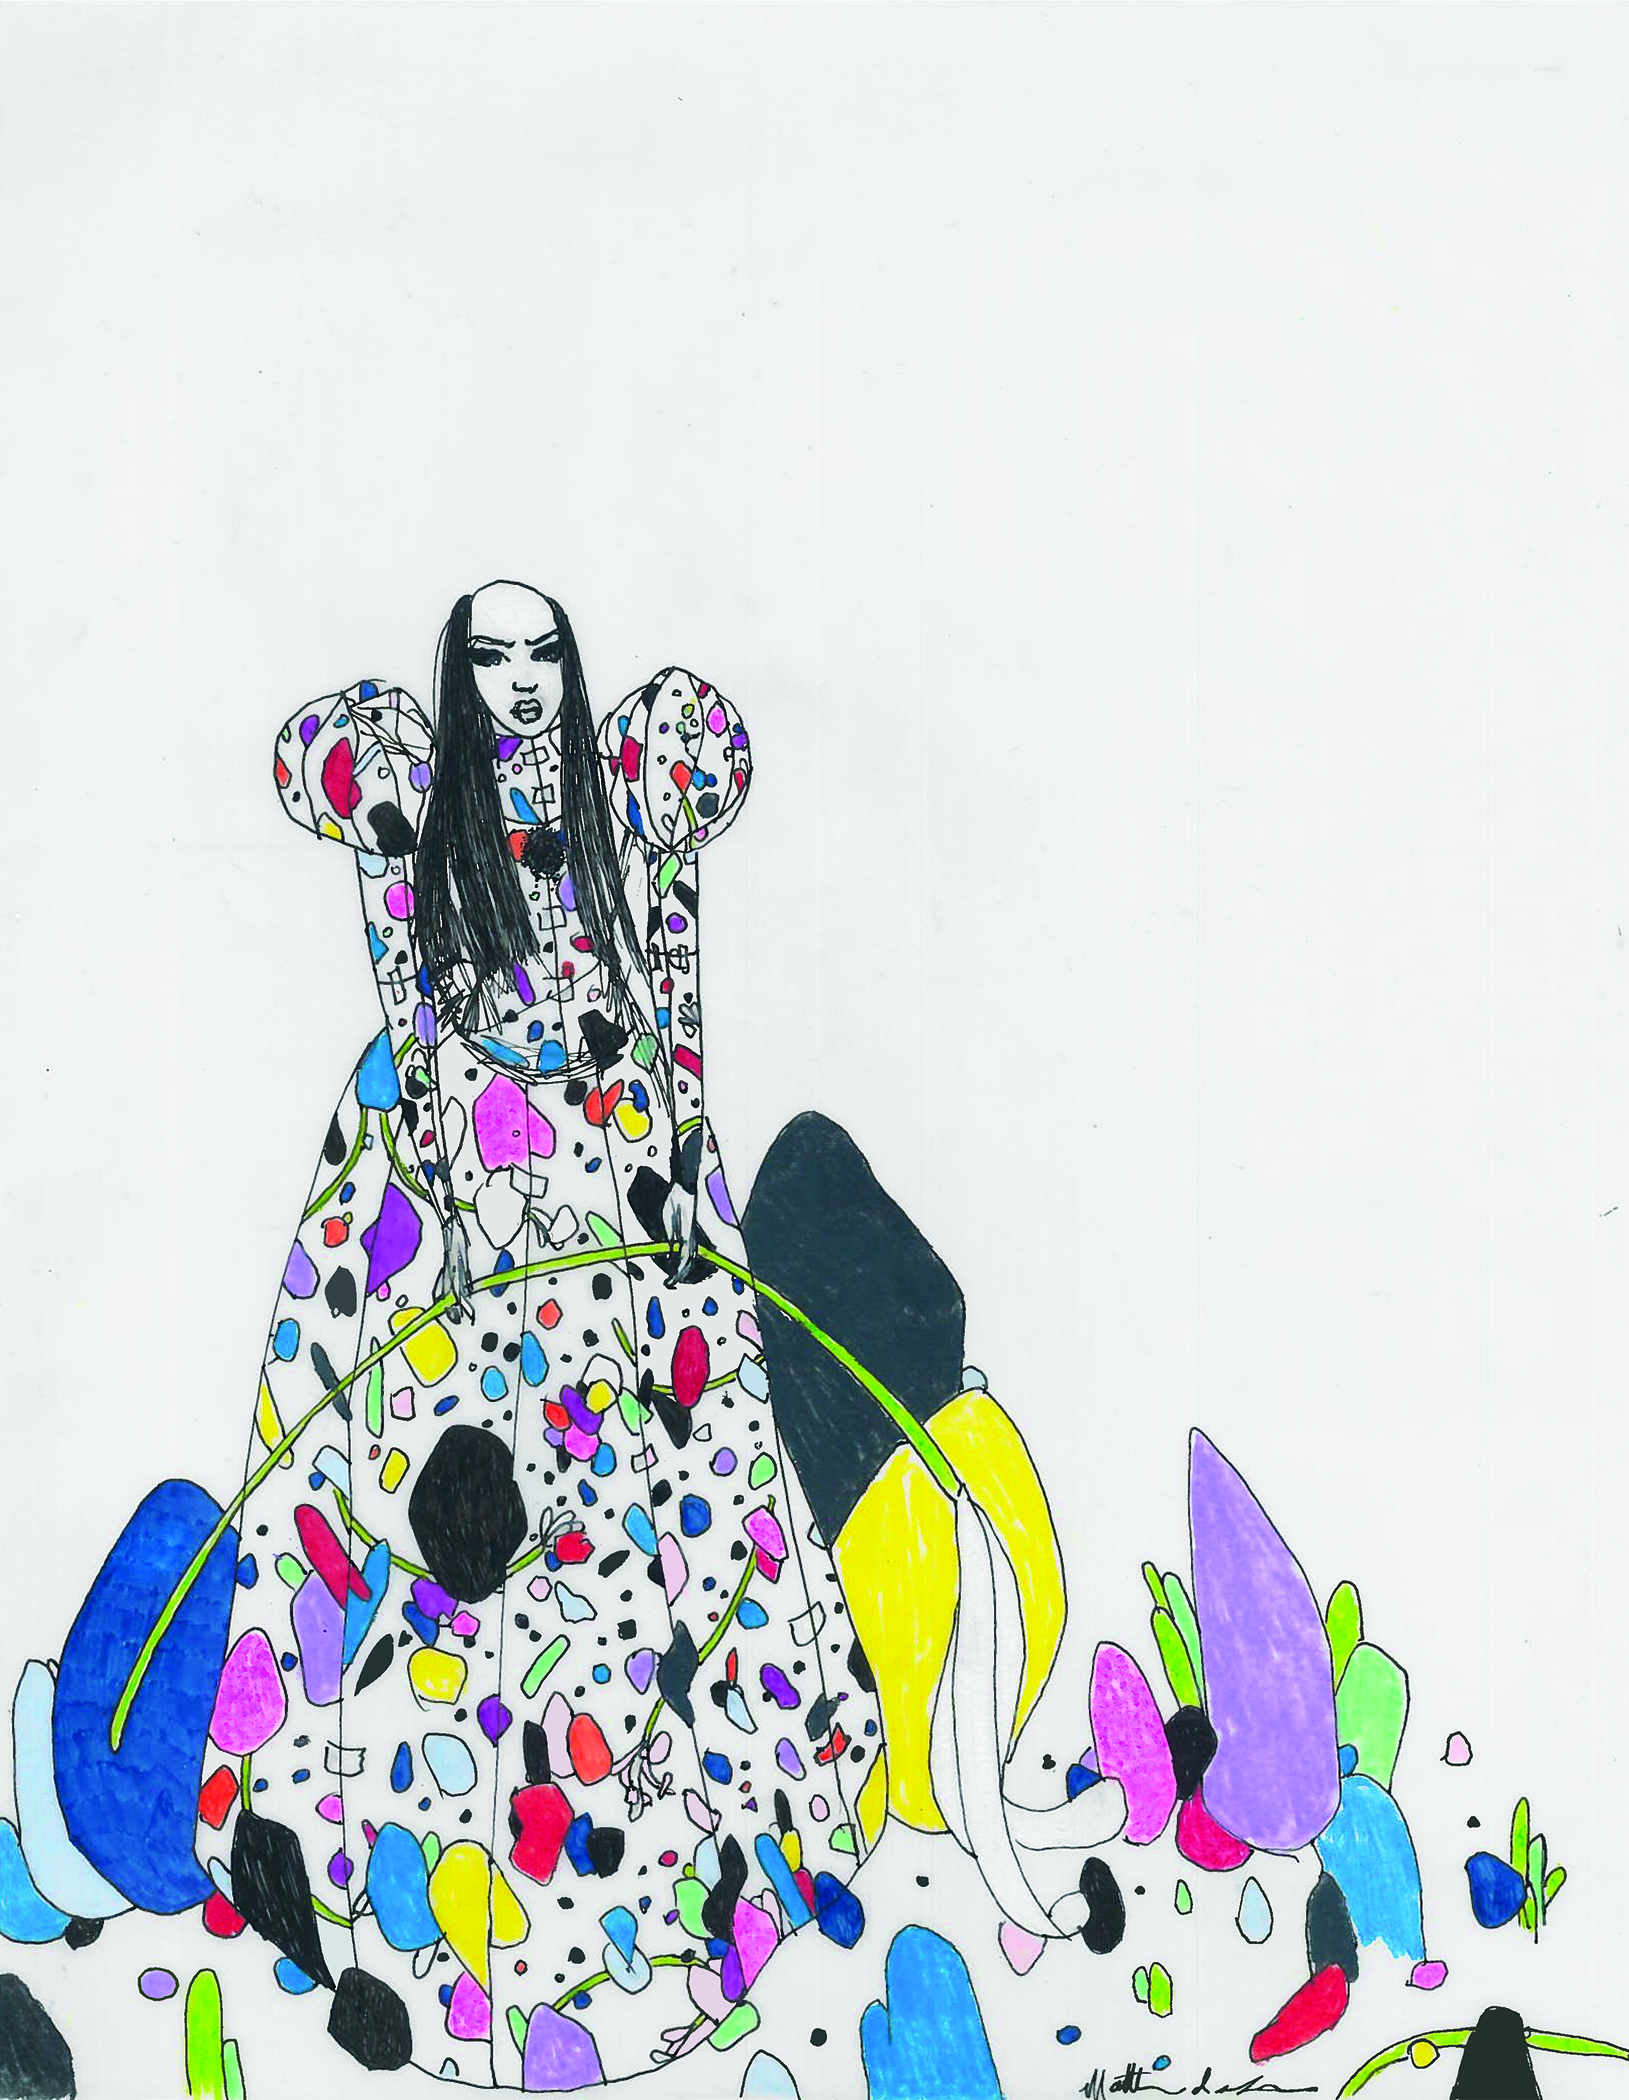   Untitled Wearing Paper Drawing Rubble Dress  2018 Pen, marker, and color pencil on vellum 11 x 14 inches 